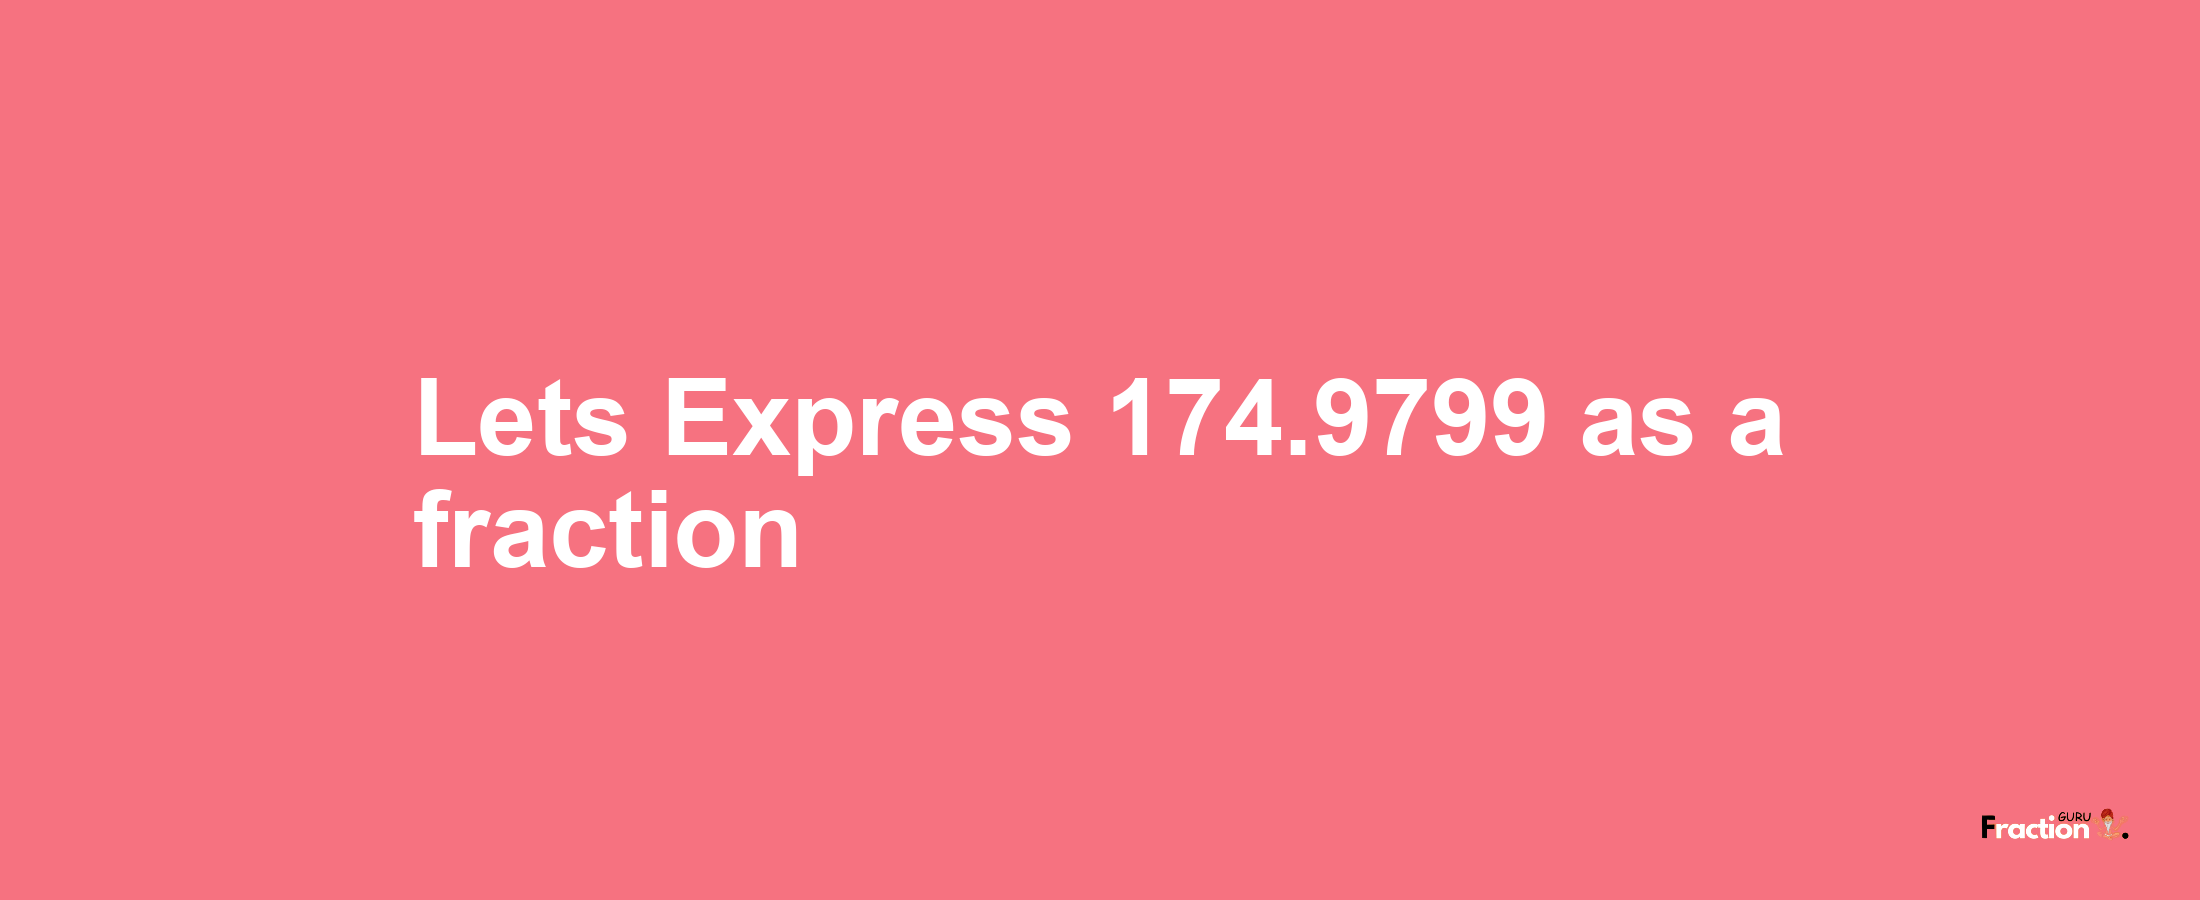 Lets Express 174.9799 as afraction